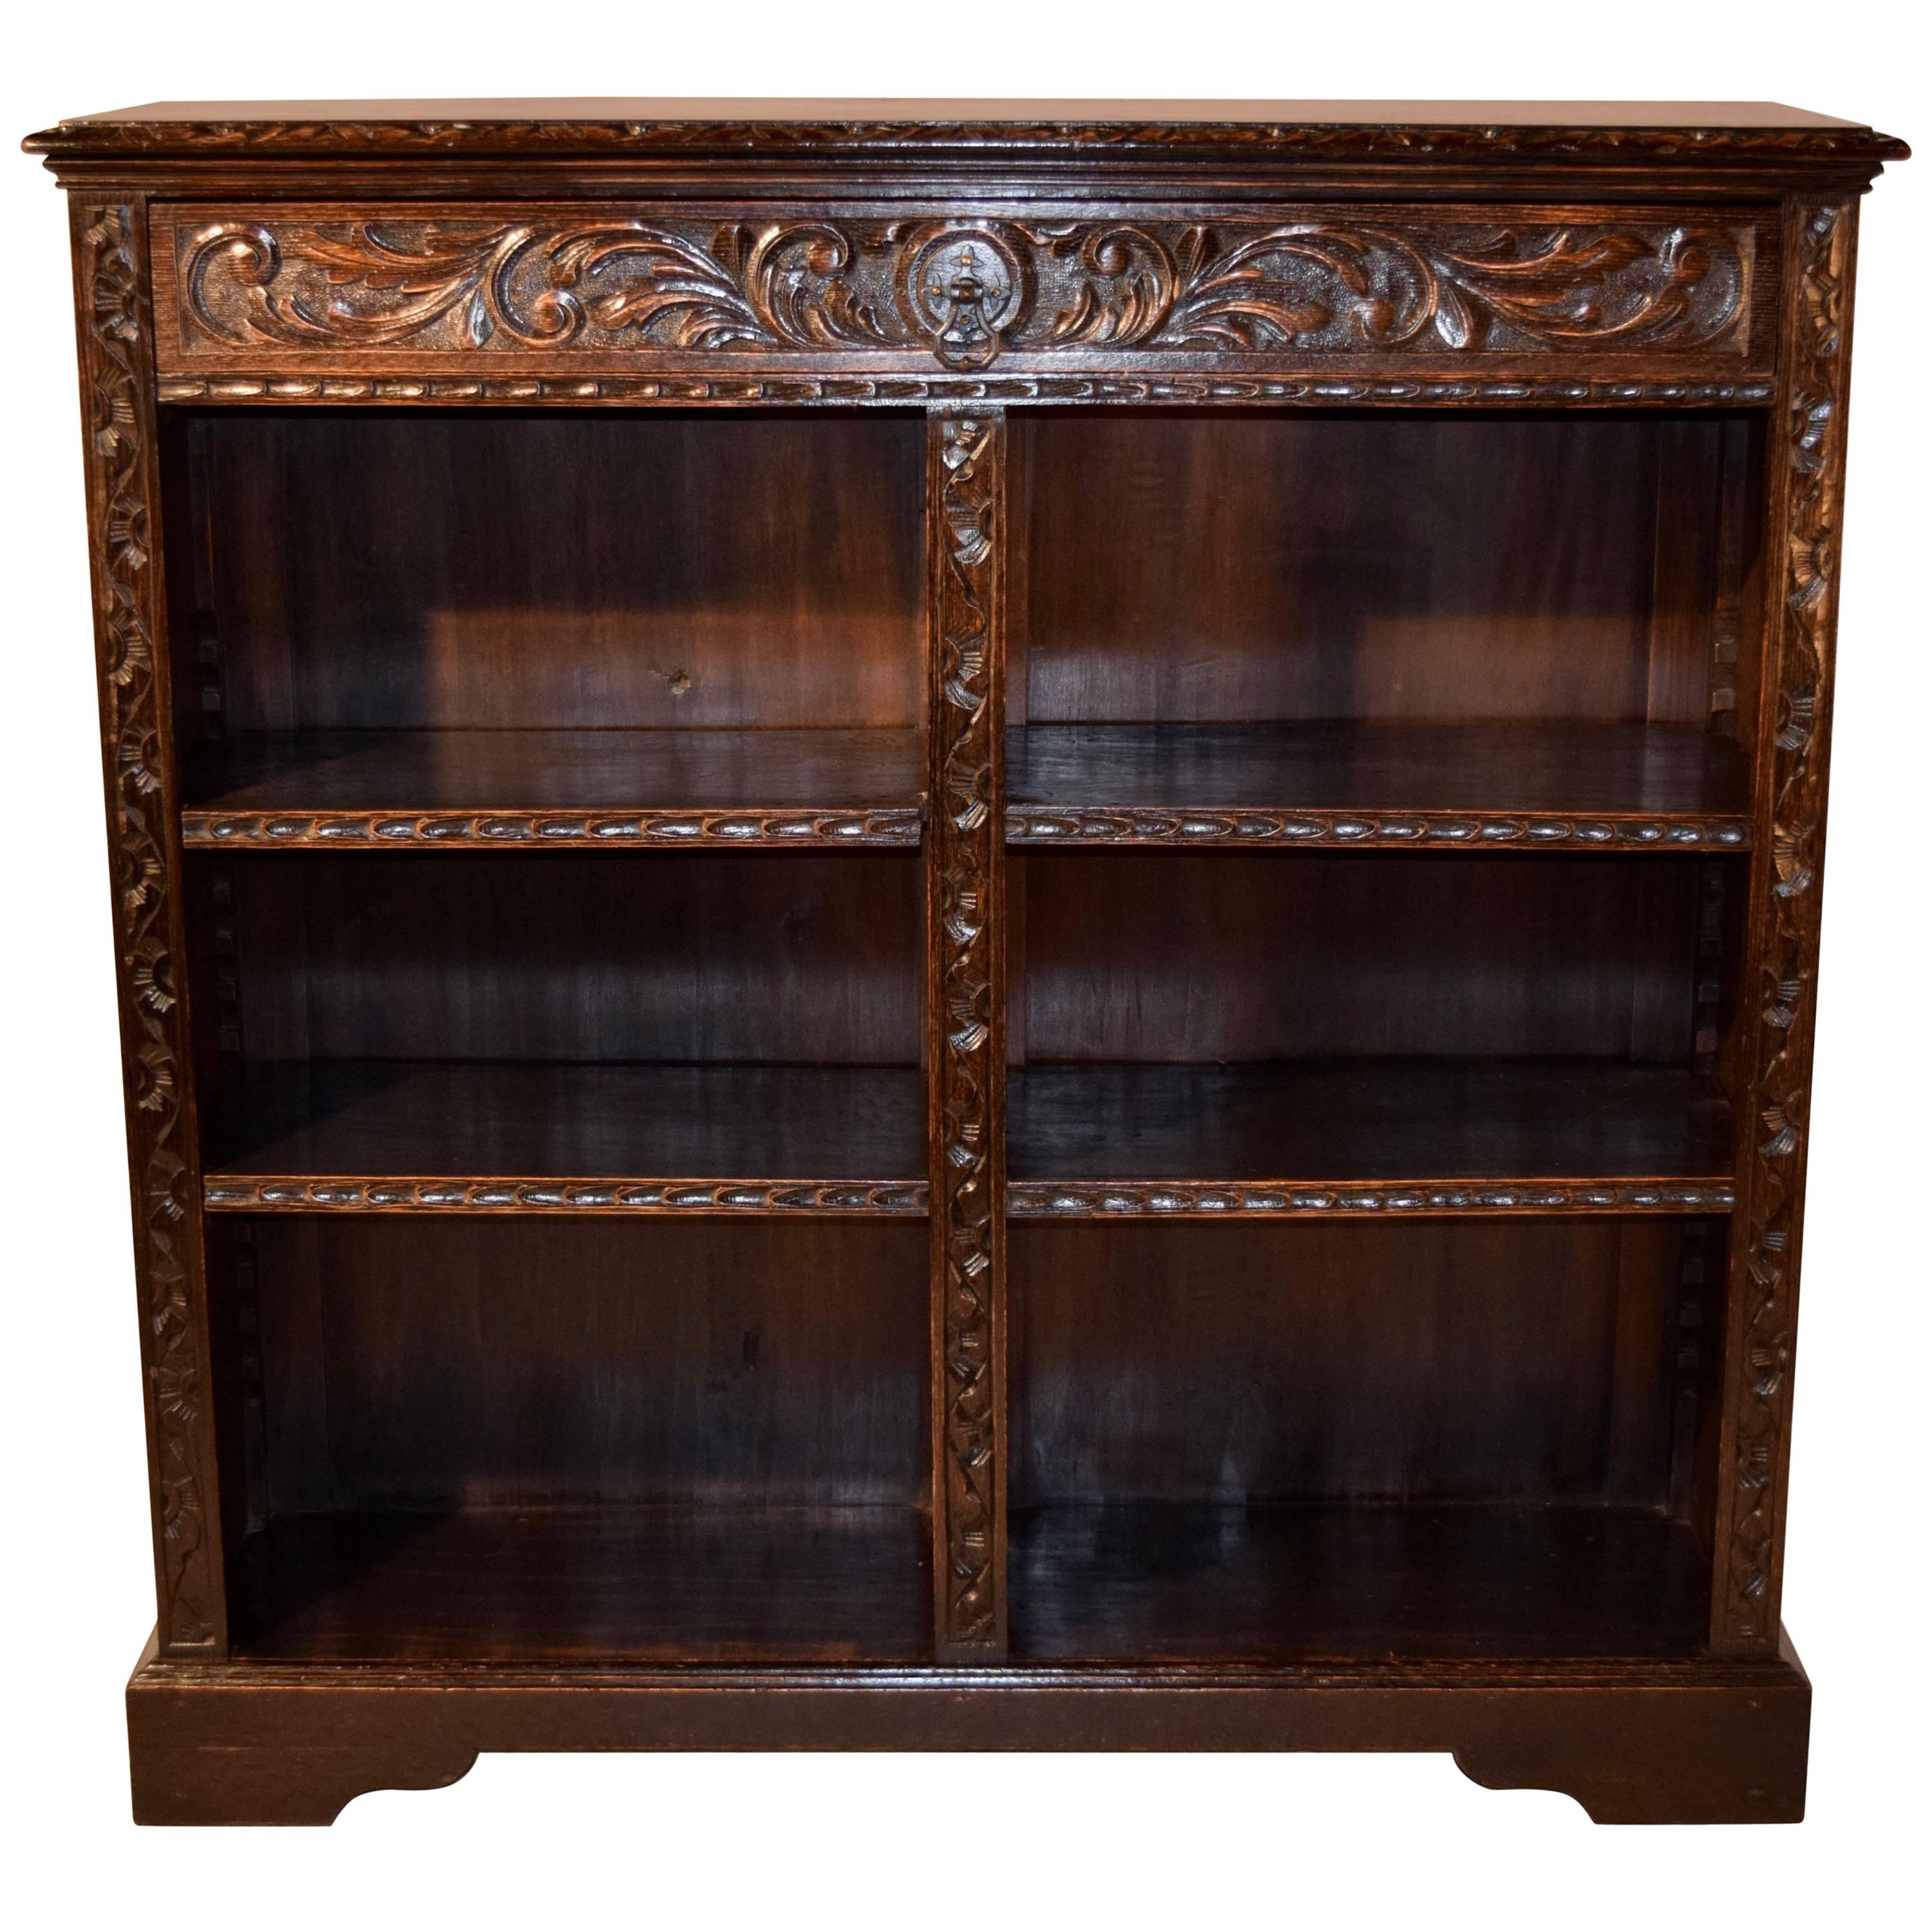 19th Century English Carved Bookcase